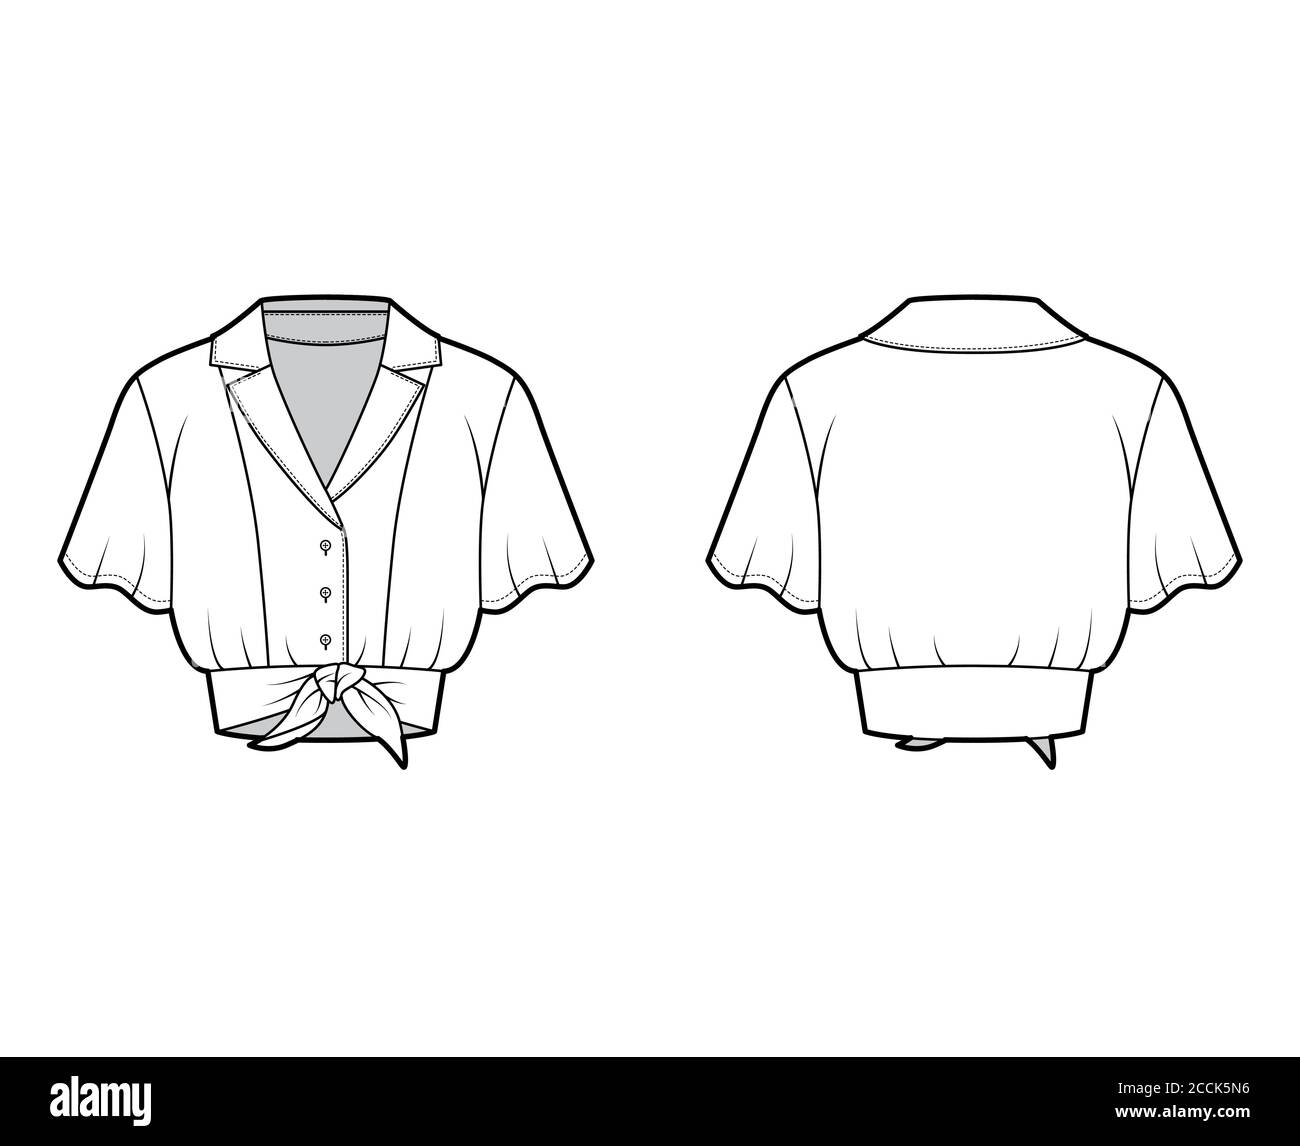 Tie-front cropped shirt technical fashion illustration with camp collar, short circle sleeves, front button fastenings. Flat blouse apparel template front back white color. Women men unisex top mockup Stock Vector